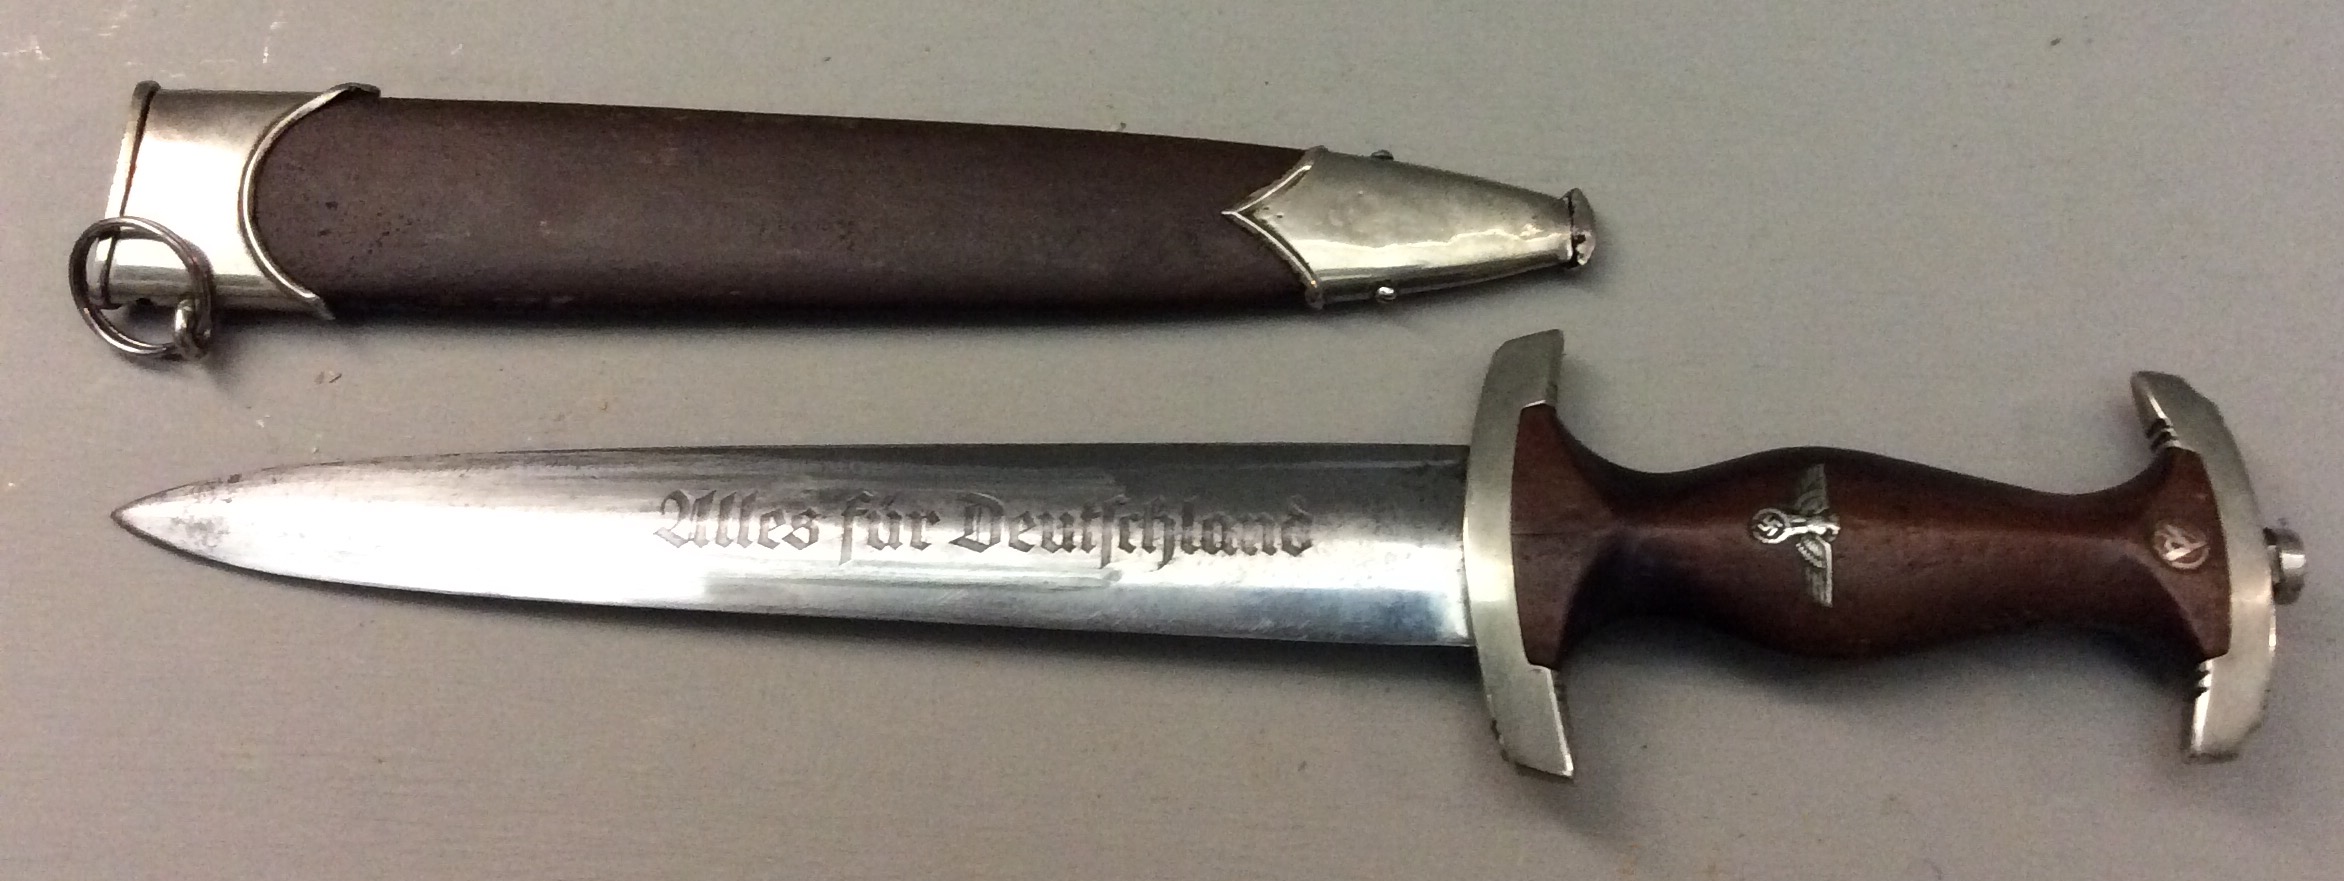 A WORLD WAR II GERMAN SA DAGGER Brown wooden grip with solid nickel fittings and brown leather - Image 10 of 10